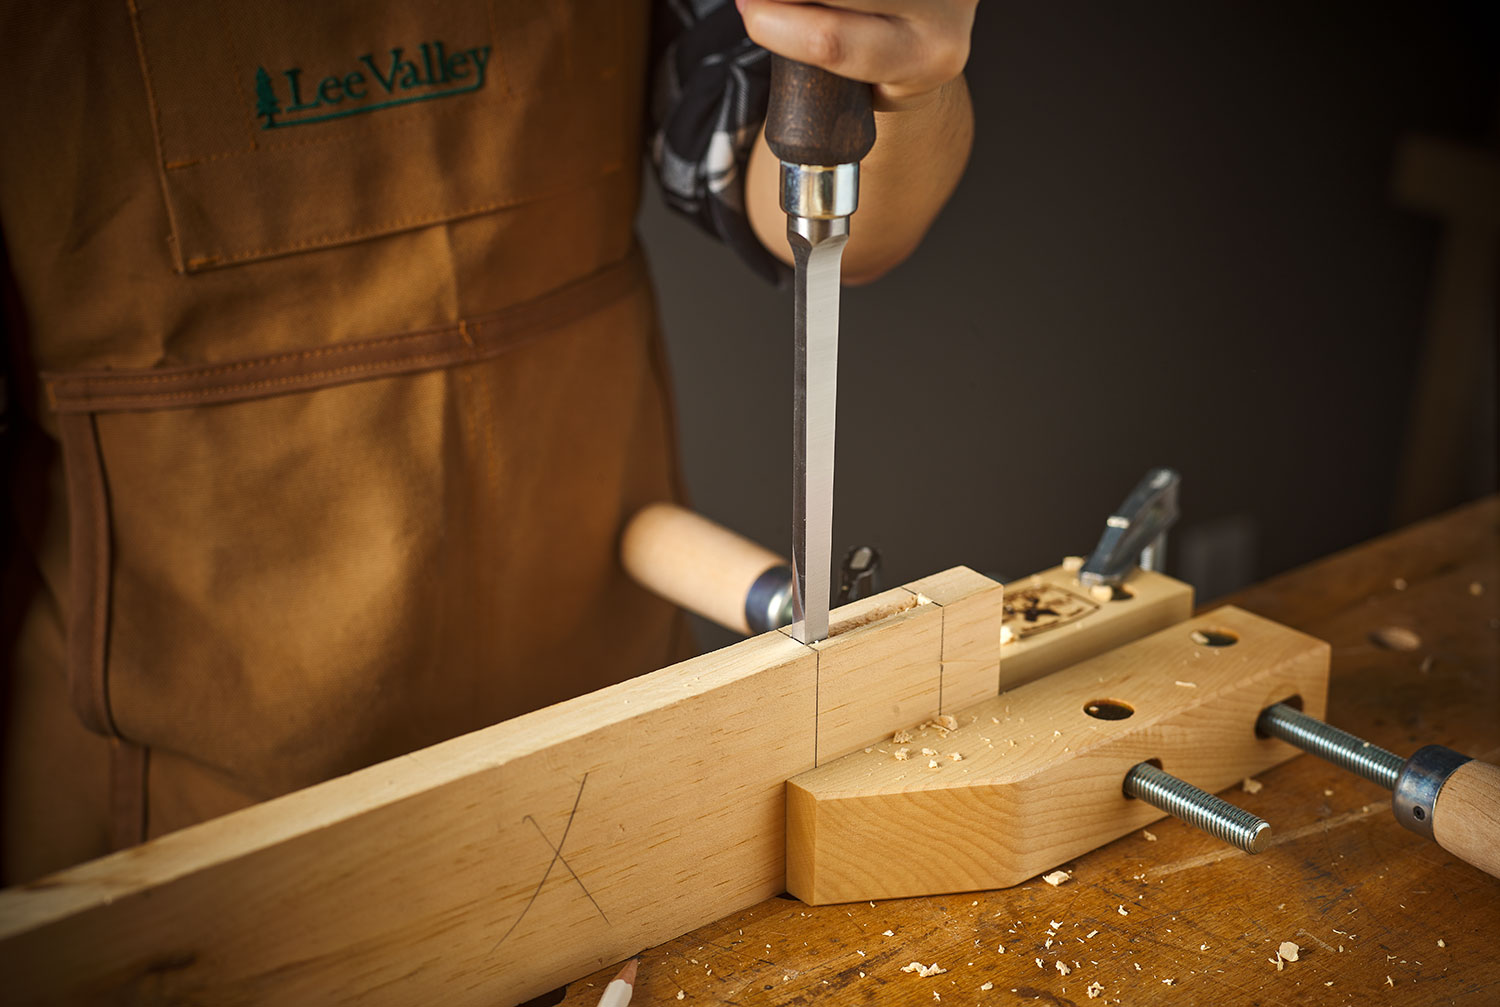 A Narex chisel is being held at a 90° angle to cut a mortise into a board.